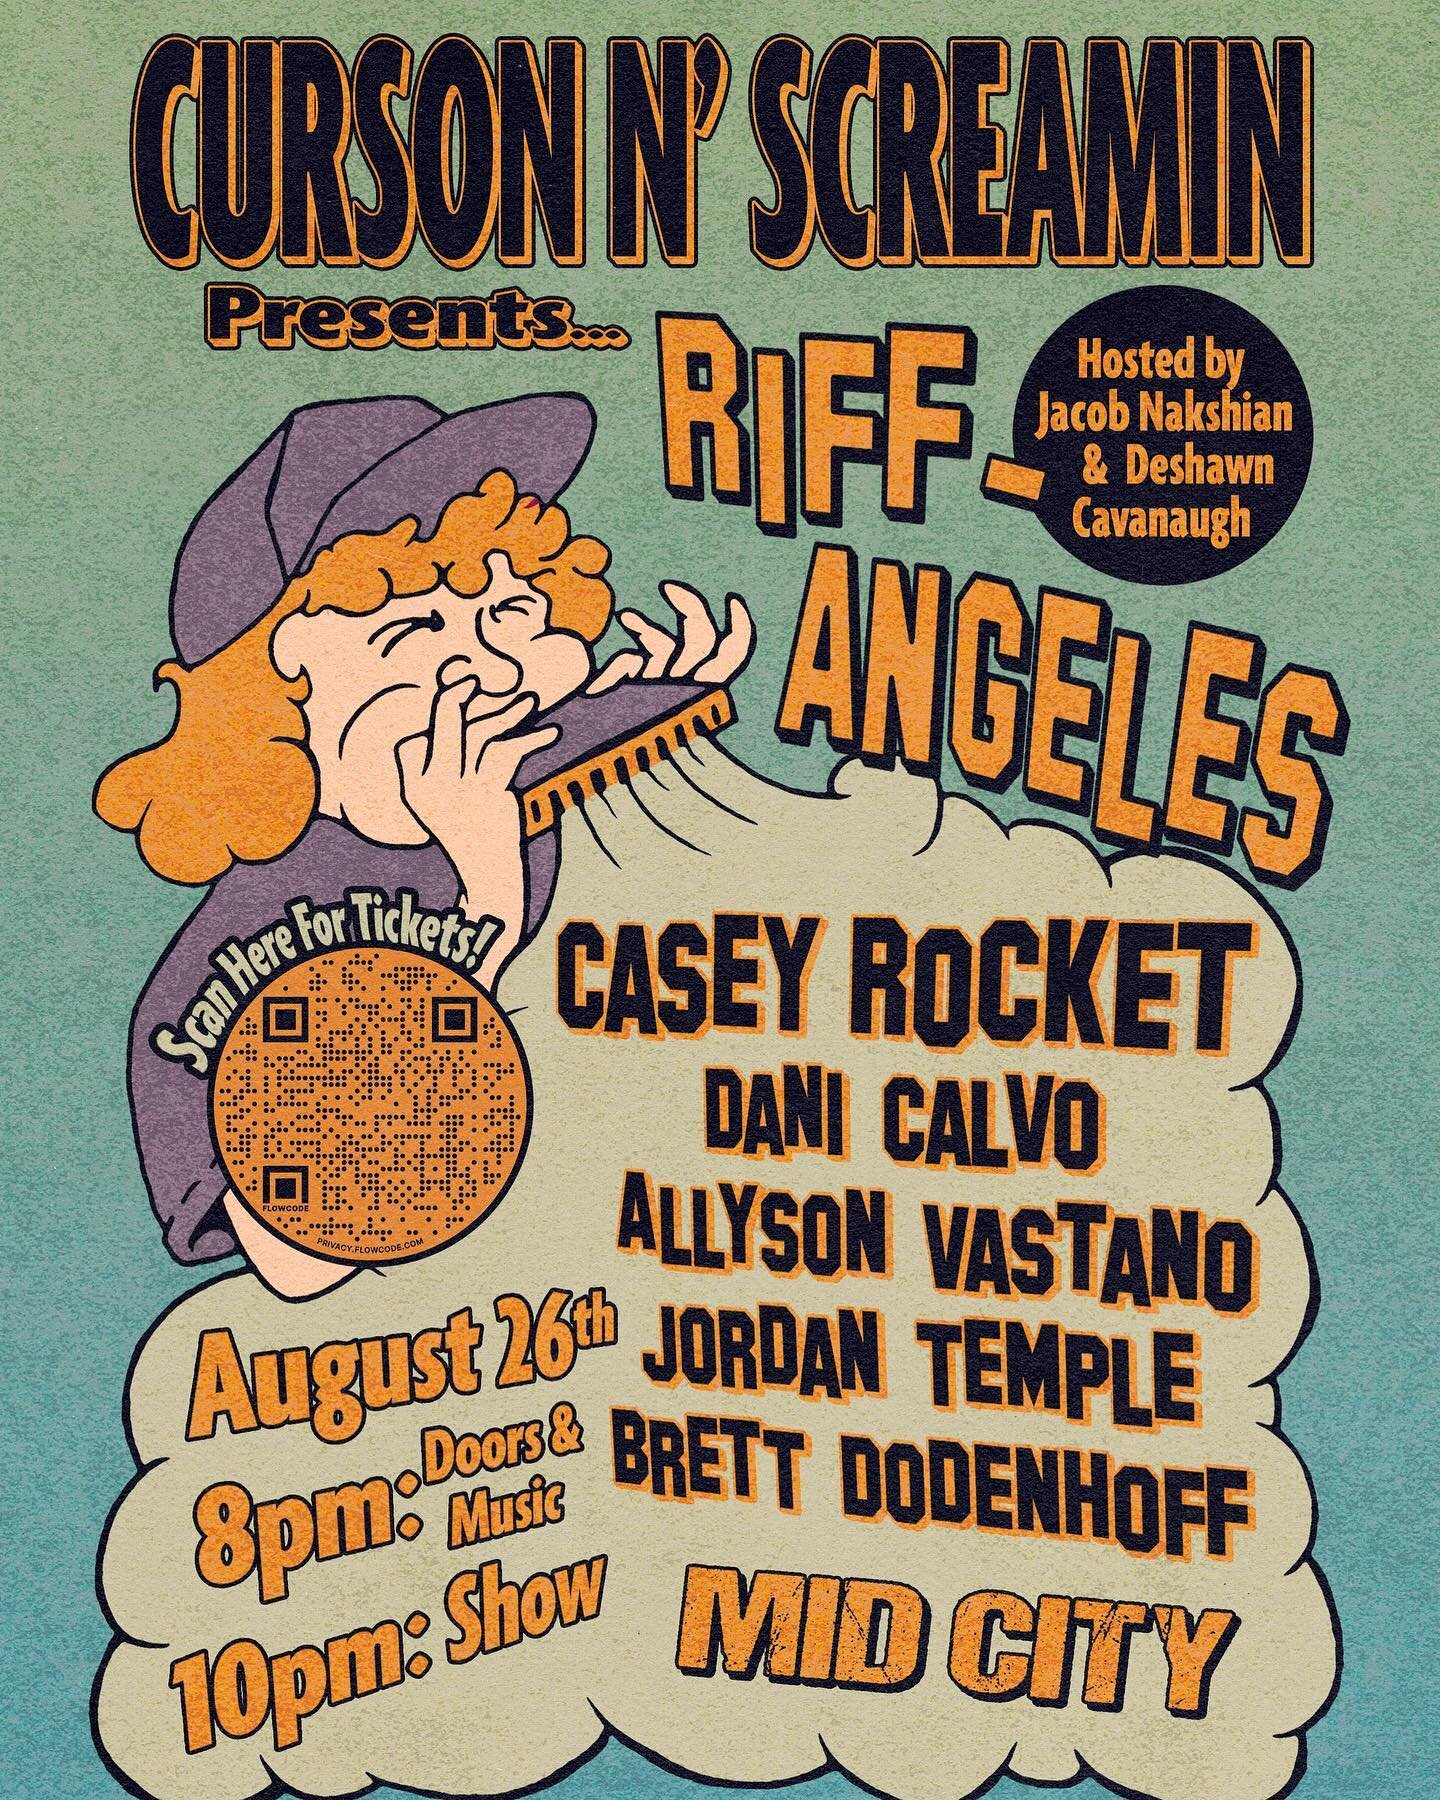 Curson n&rsquo; Screamin presents&hellip;Riff Angleles! Tickets are ON SALE NOW!

We are two weeks out and we are beyond excited to bring you the next installment of Curson n&rsquo; Screamin, packed with an incredibly special lineup and a brand-new v